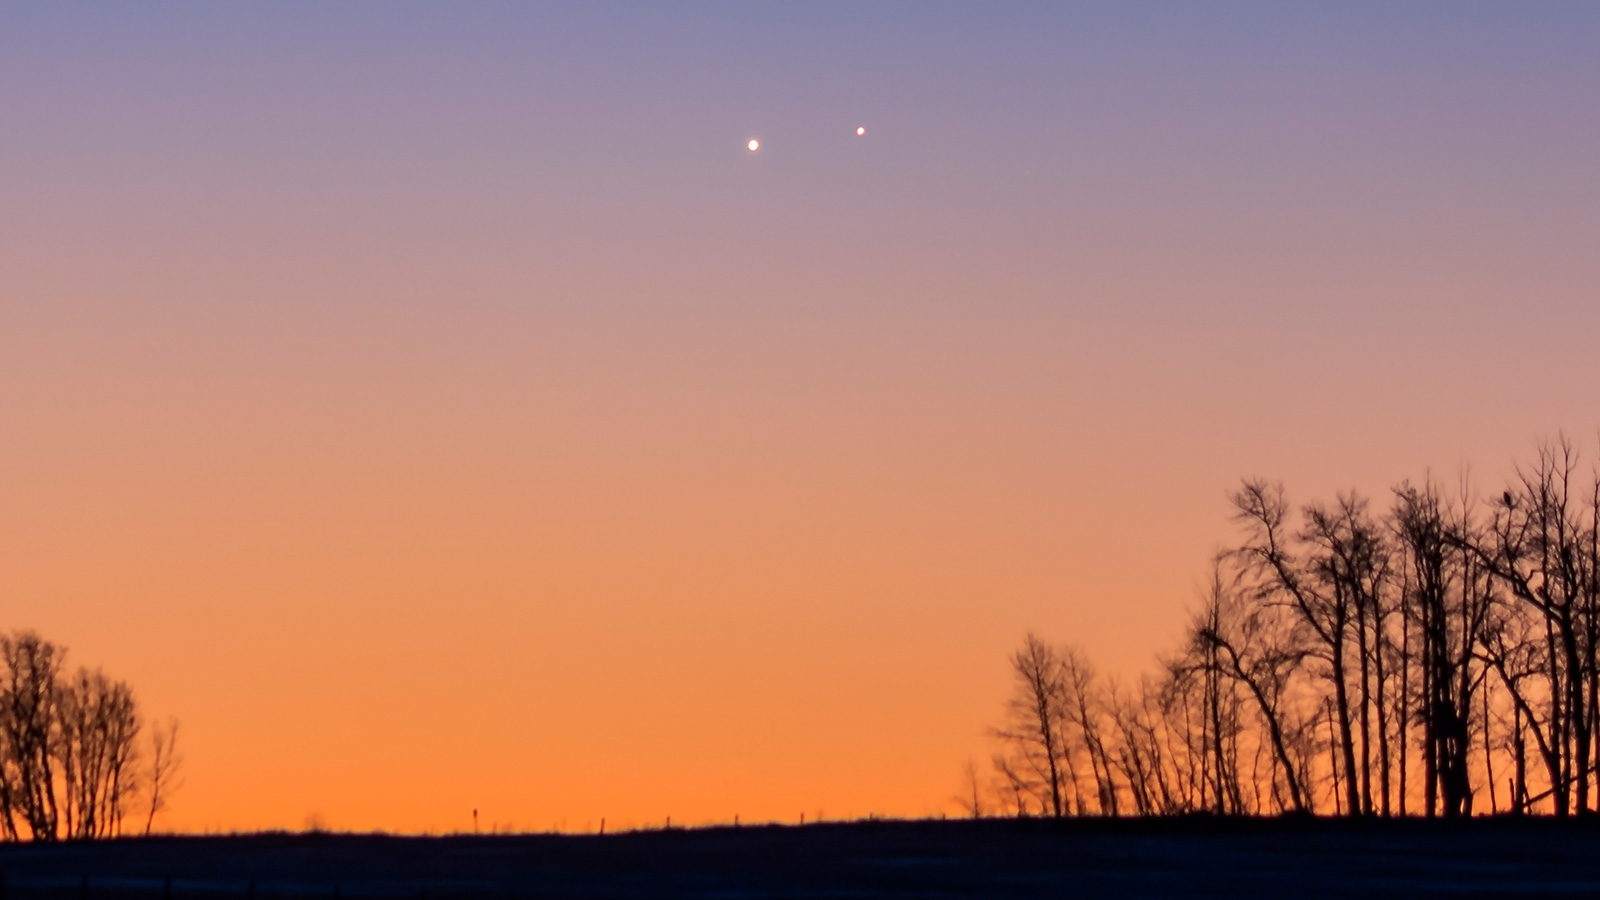 Venus and Jupiter in a very close conjunction 20 arc minutes apart at dawn on November 13, 2017, fr...